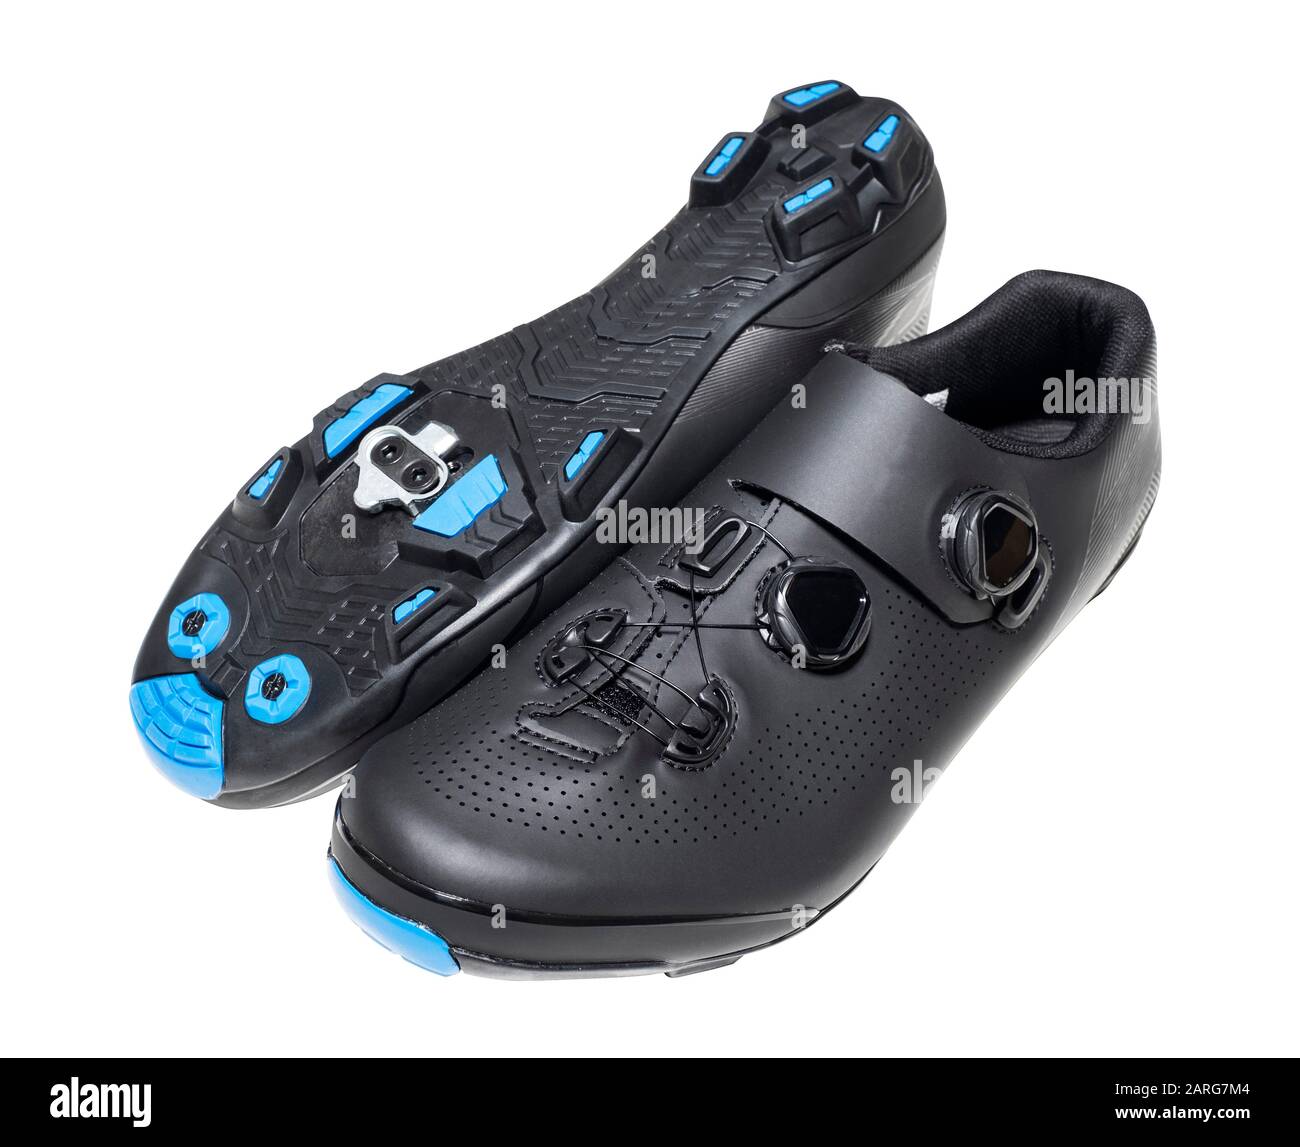 Professional cycling shoes with cleats Stock Photo